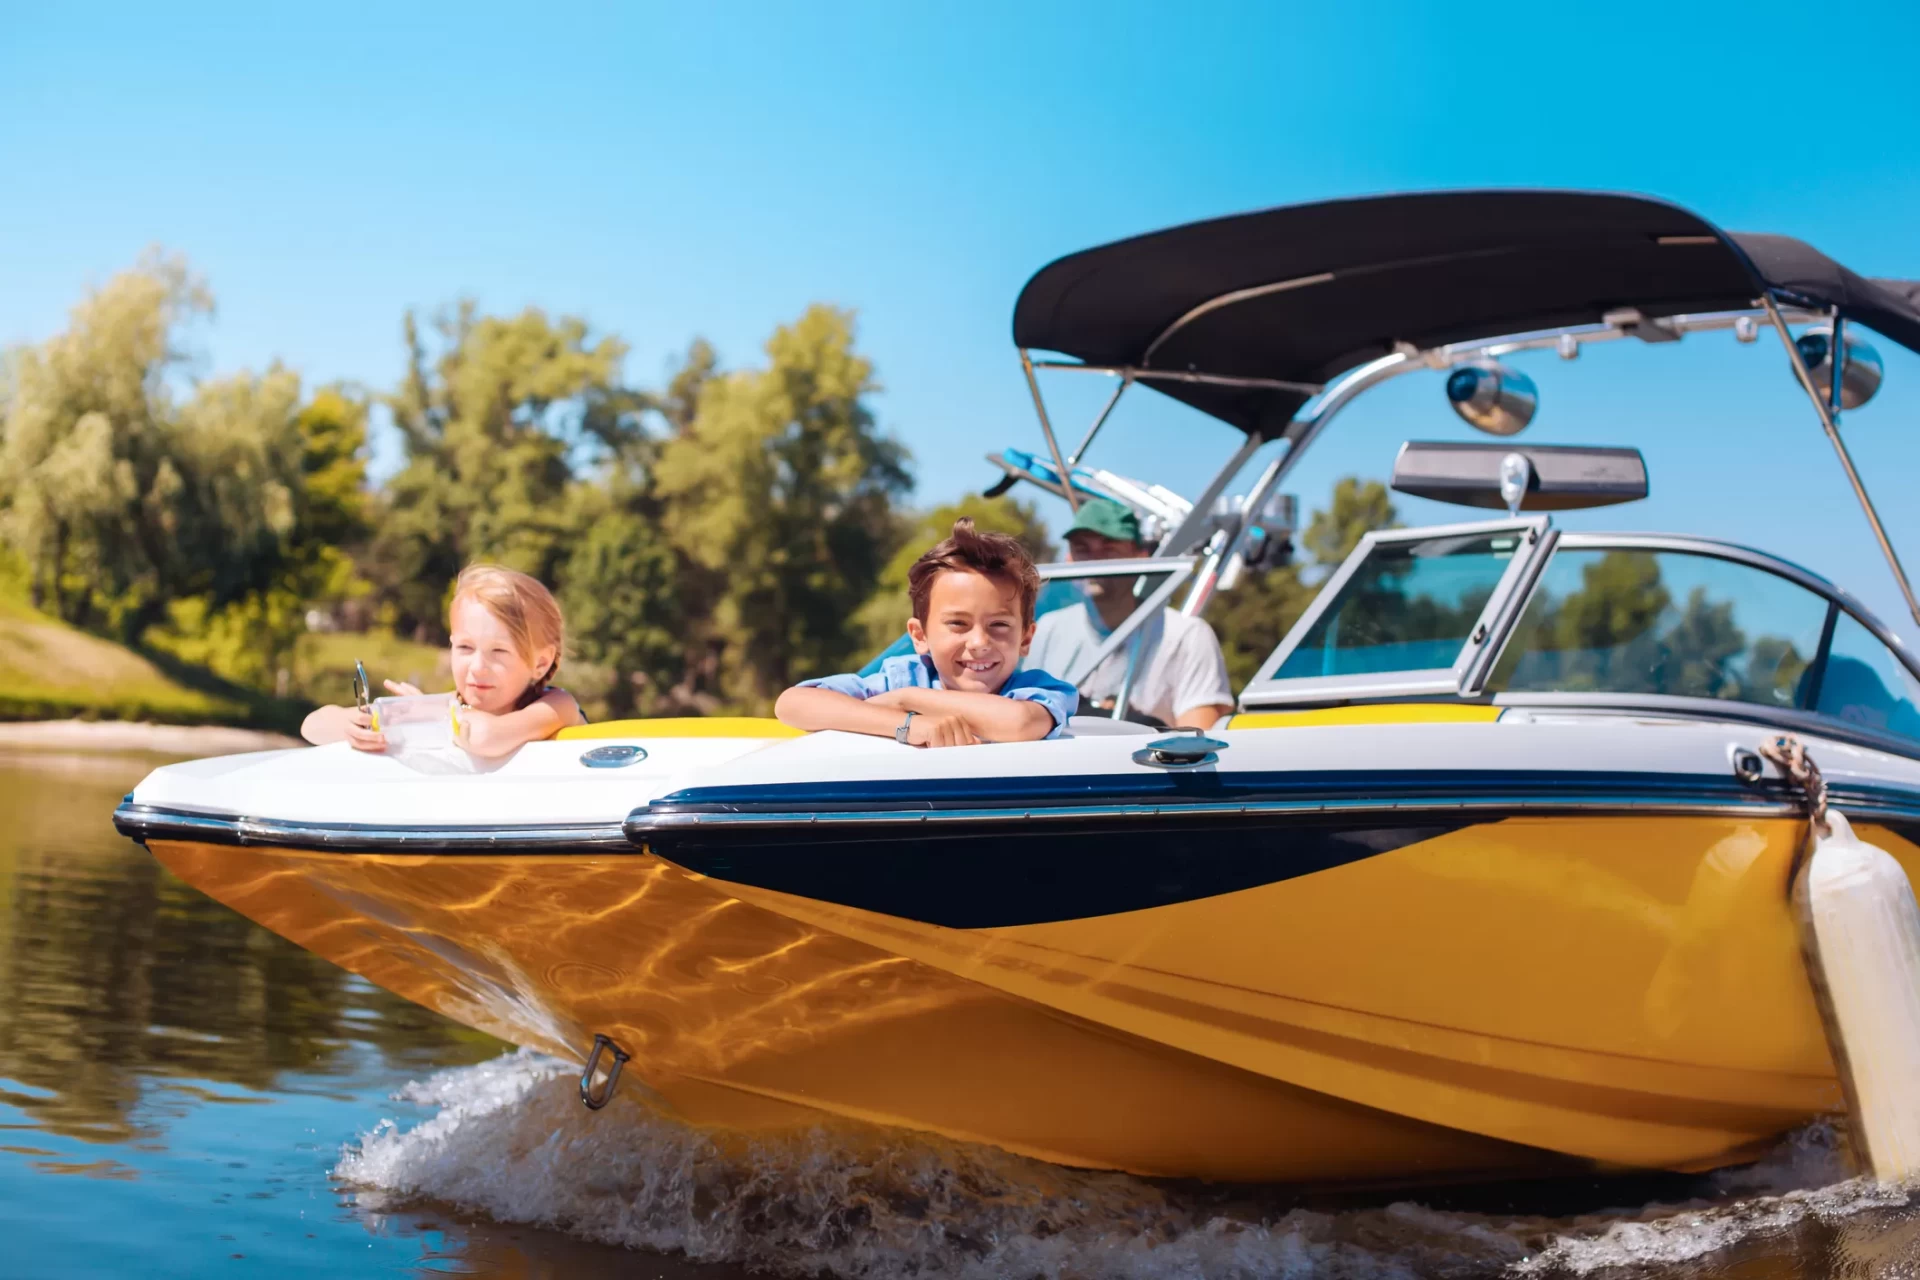 Insurance options for your boat, ATV, RV, motorcycle and more.